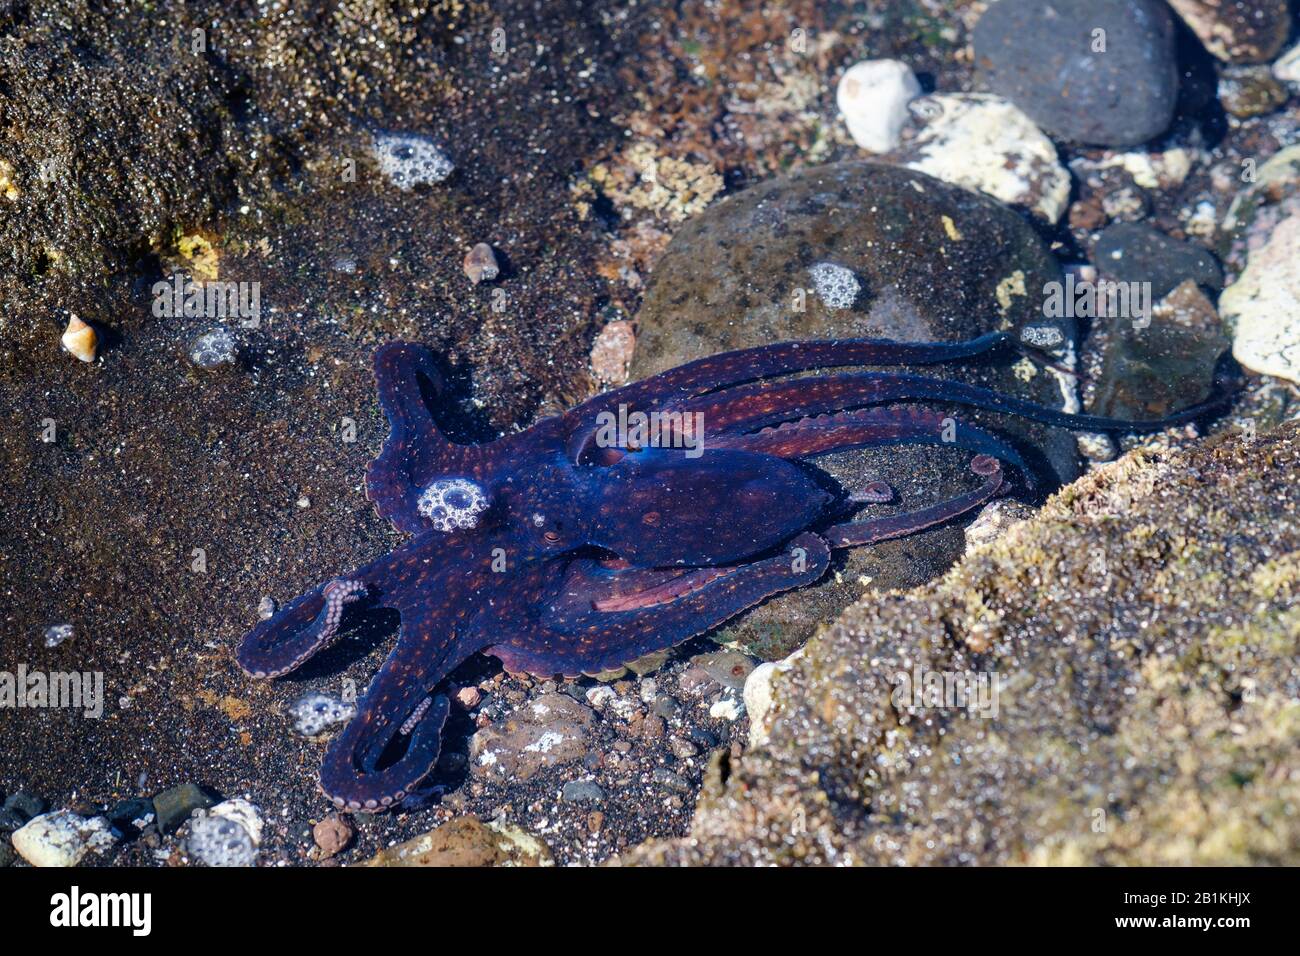 Octopus in shallow water, Valle Gran Rey, La Gomera, Canary Islands, Spain Stock Photo